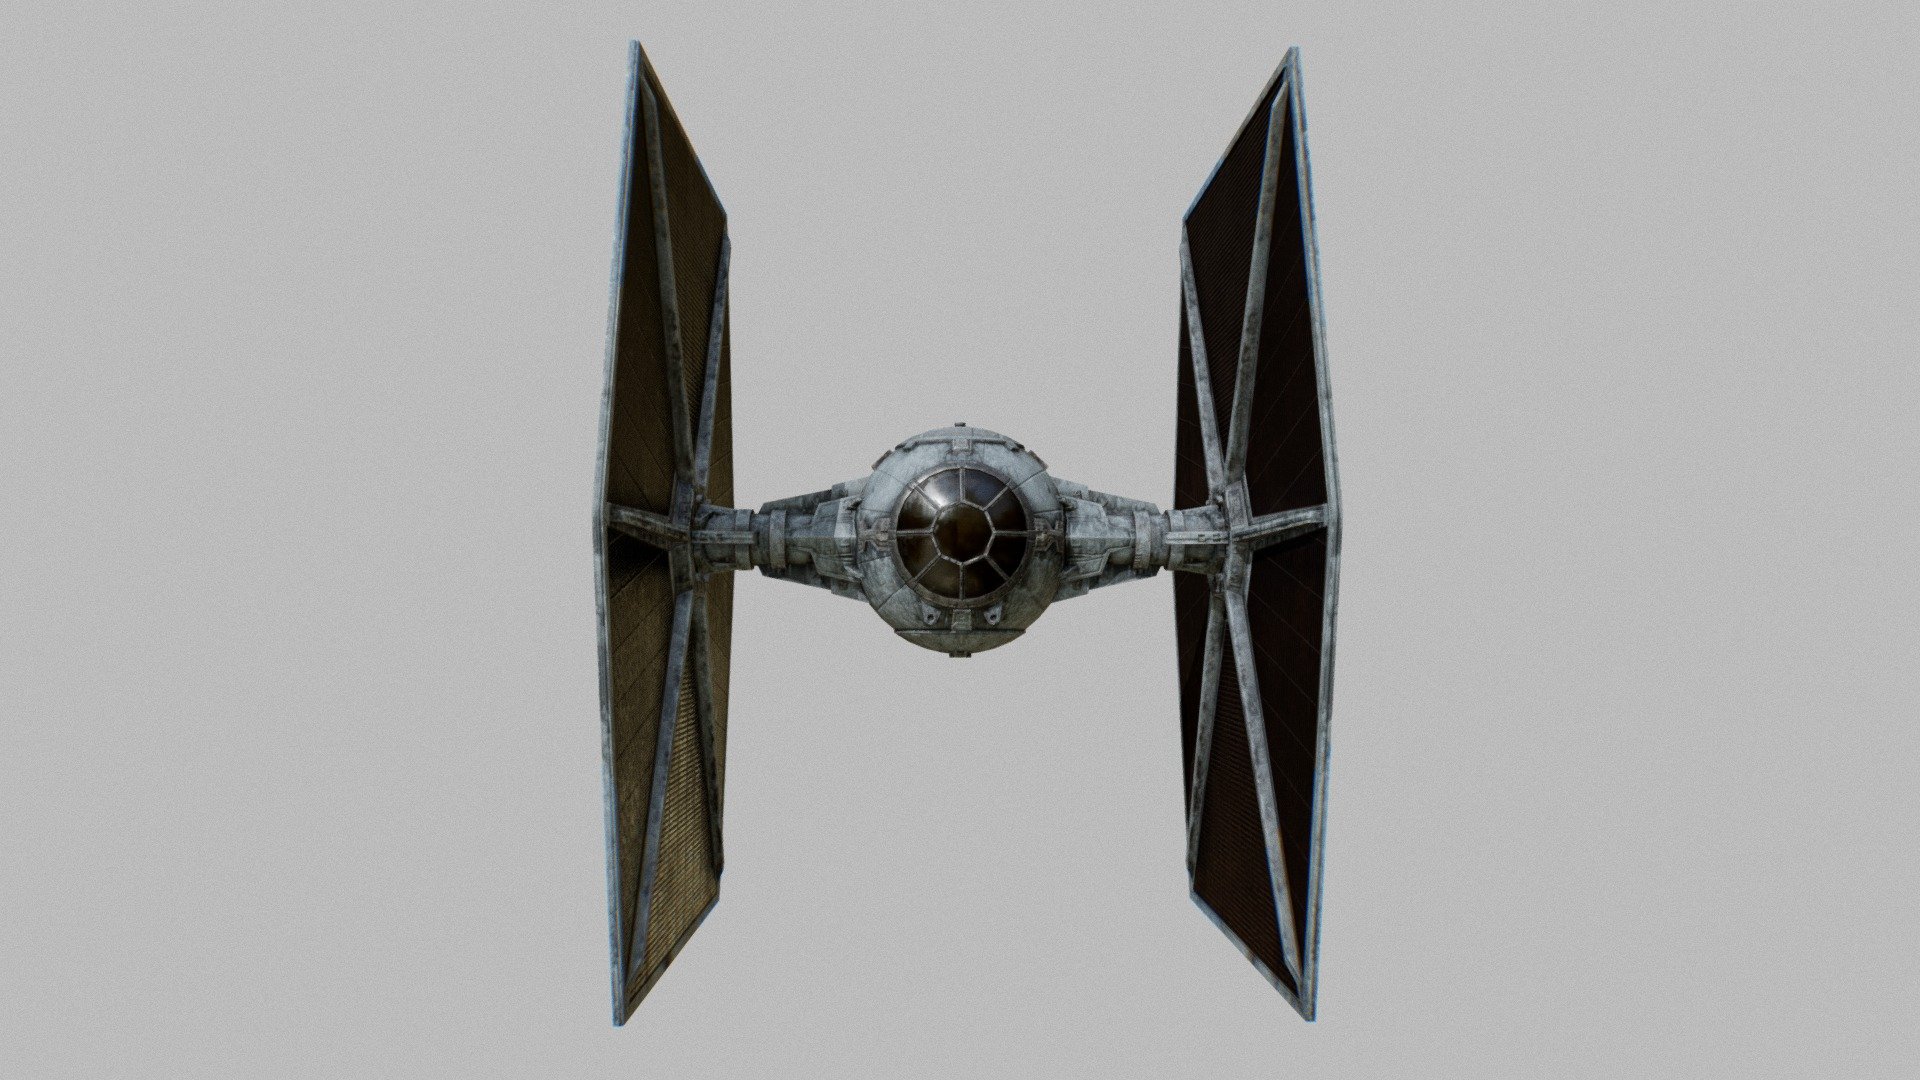 Edit: Made a vastly superior new version with a cockpit- check it out here!
https://sketchfab.com/3d-models/star-wars-lowpoly-tie-fighter-w-visible-cockpit-a9d329606dab4d6ba56e8025d4aa2ed7

Low-poly TIE fighter I made. Textured in Substance Painter 3d model